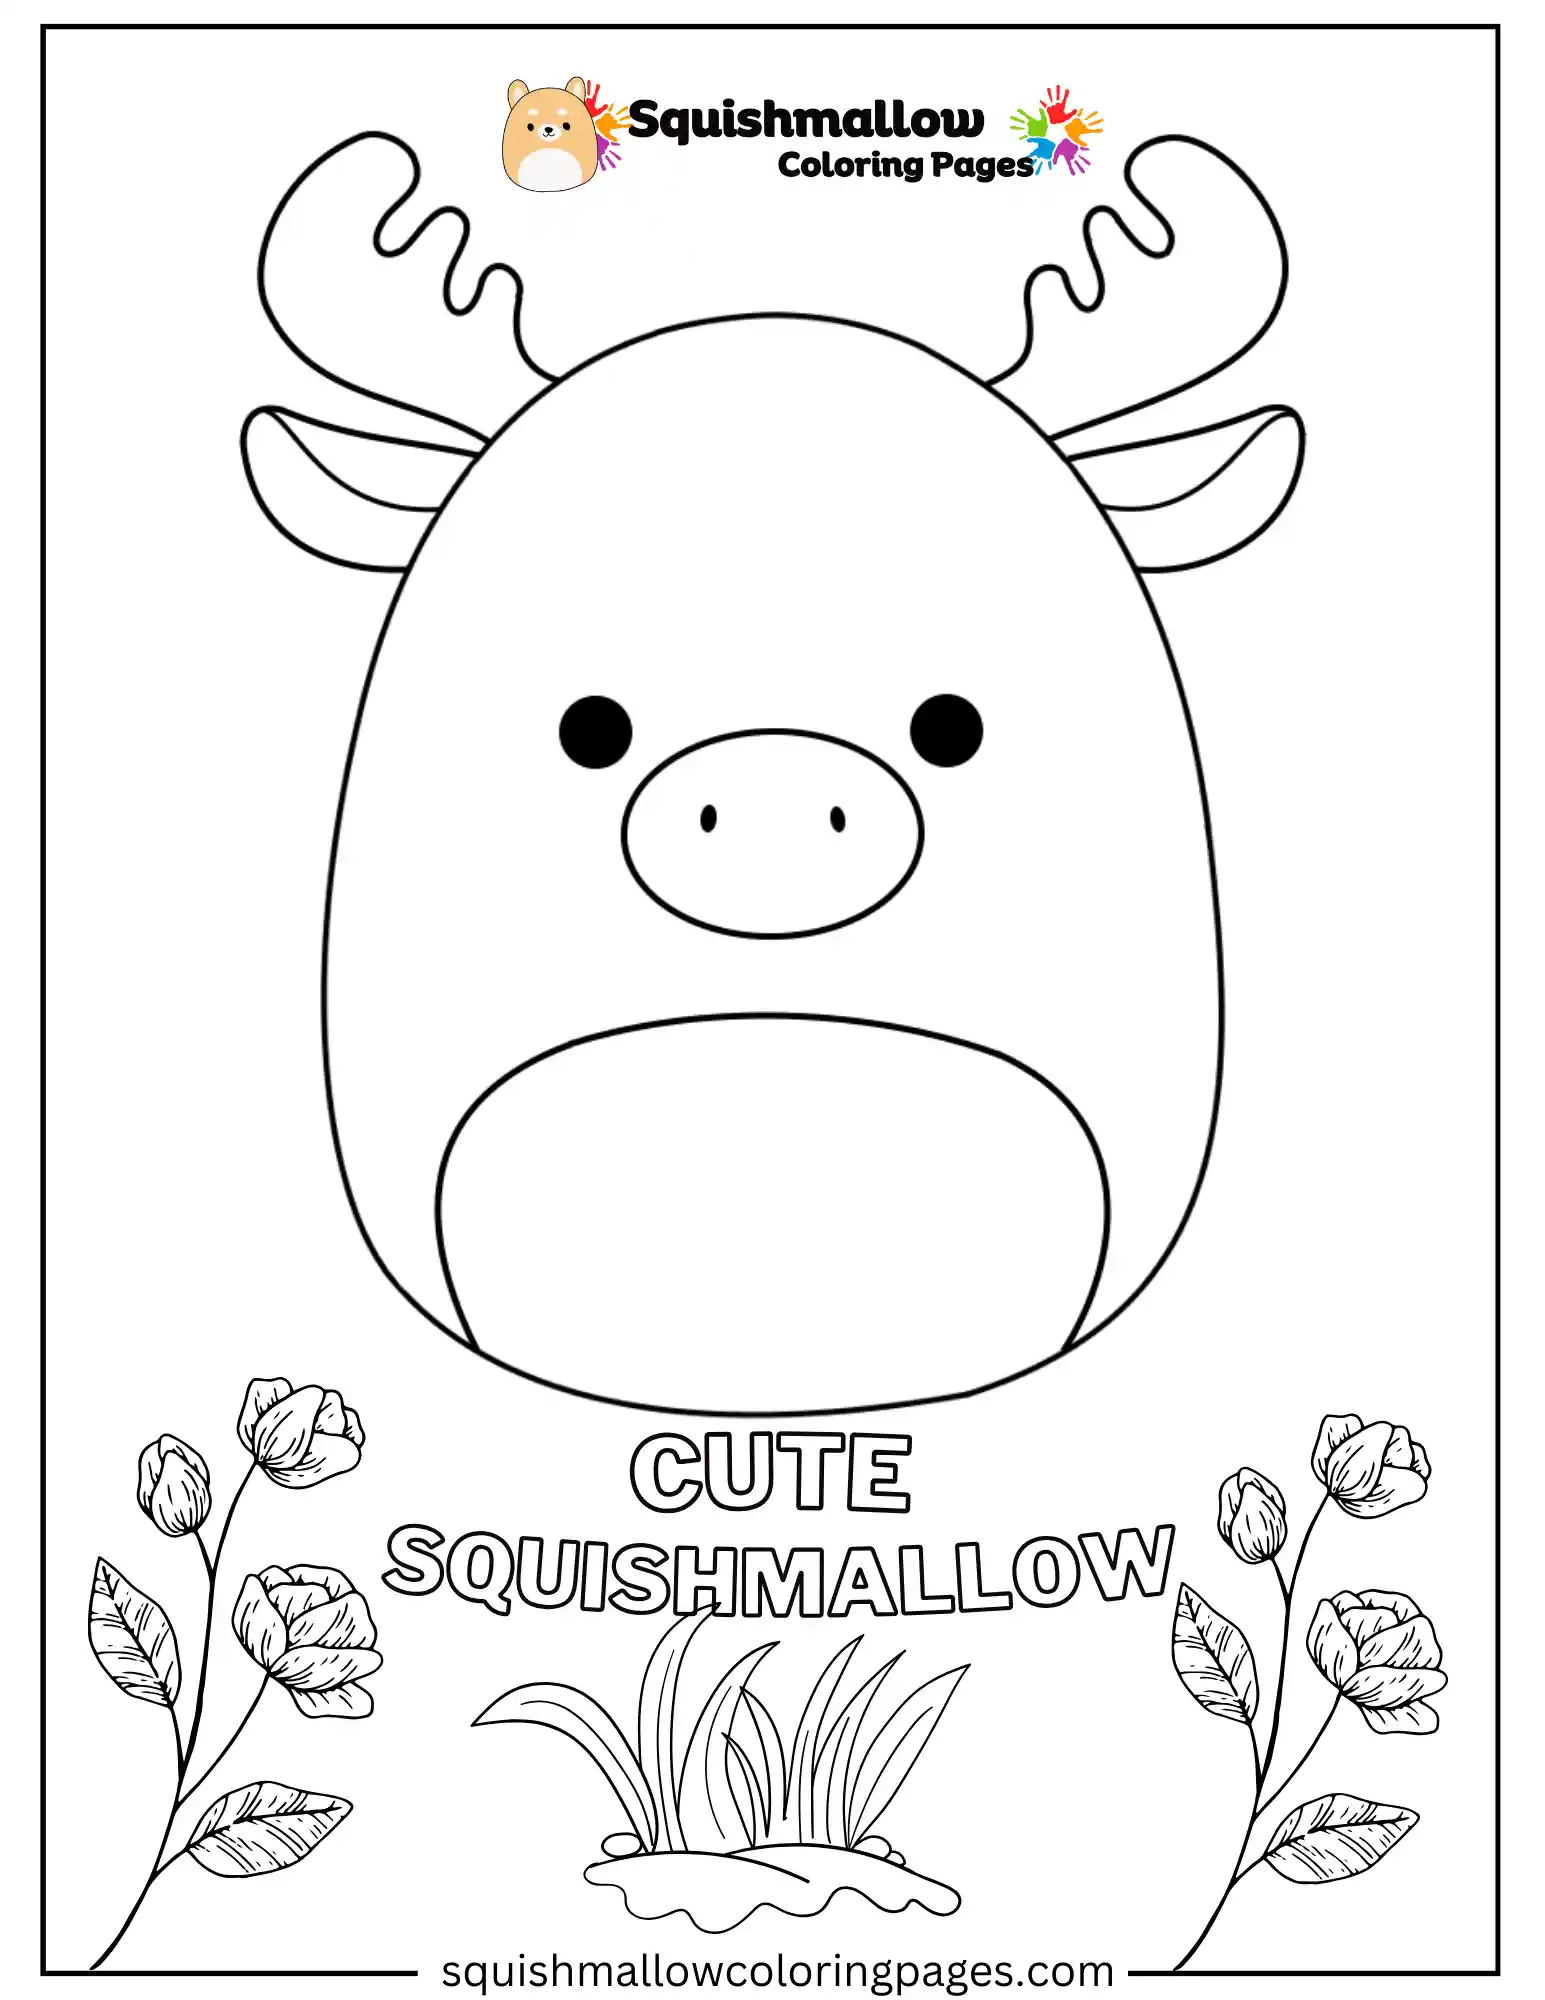 Cutie Squishmallow Coloring Pages